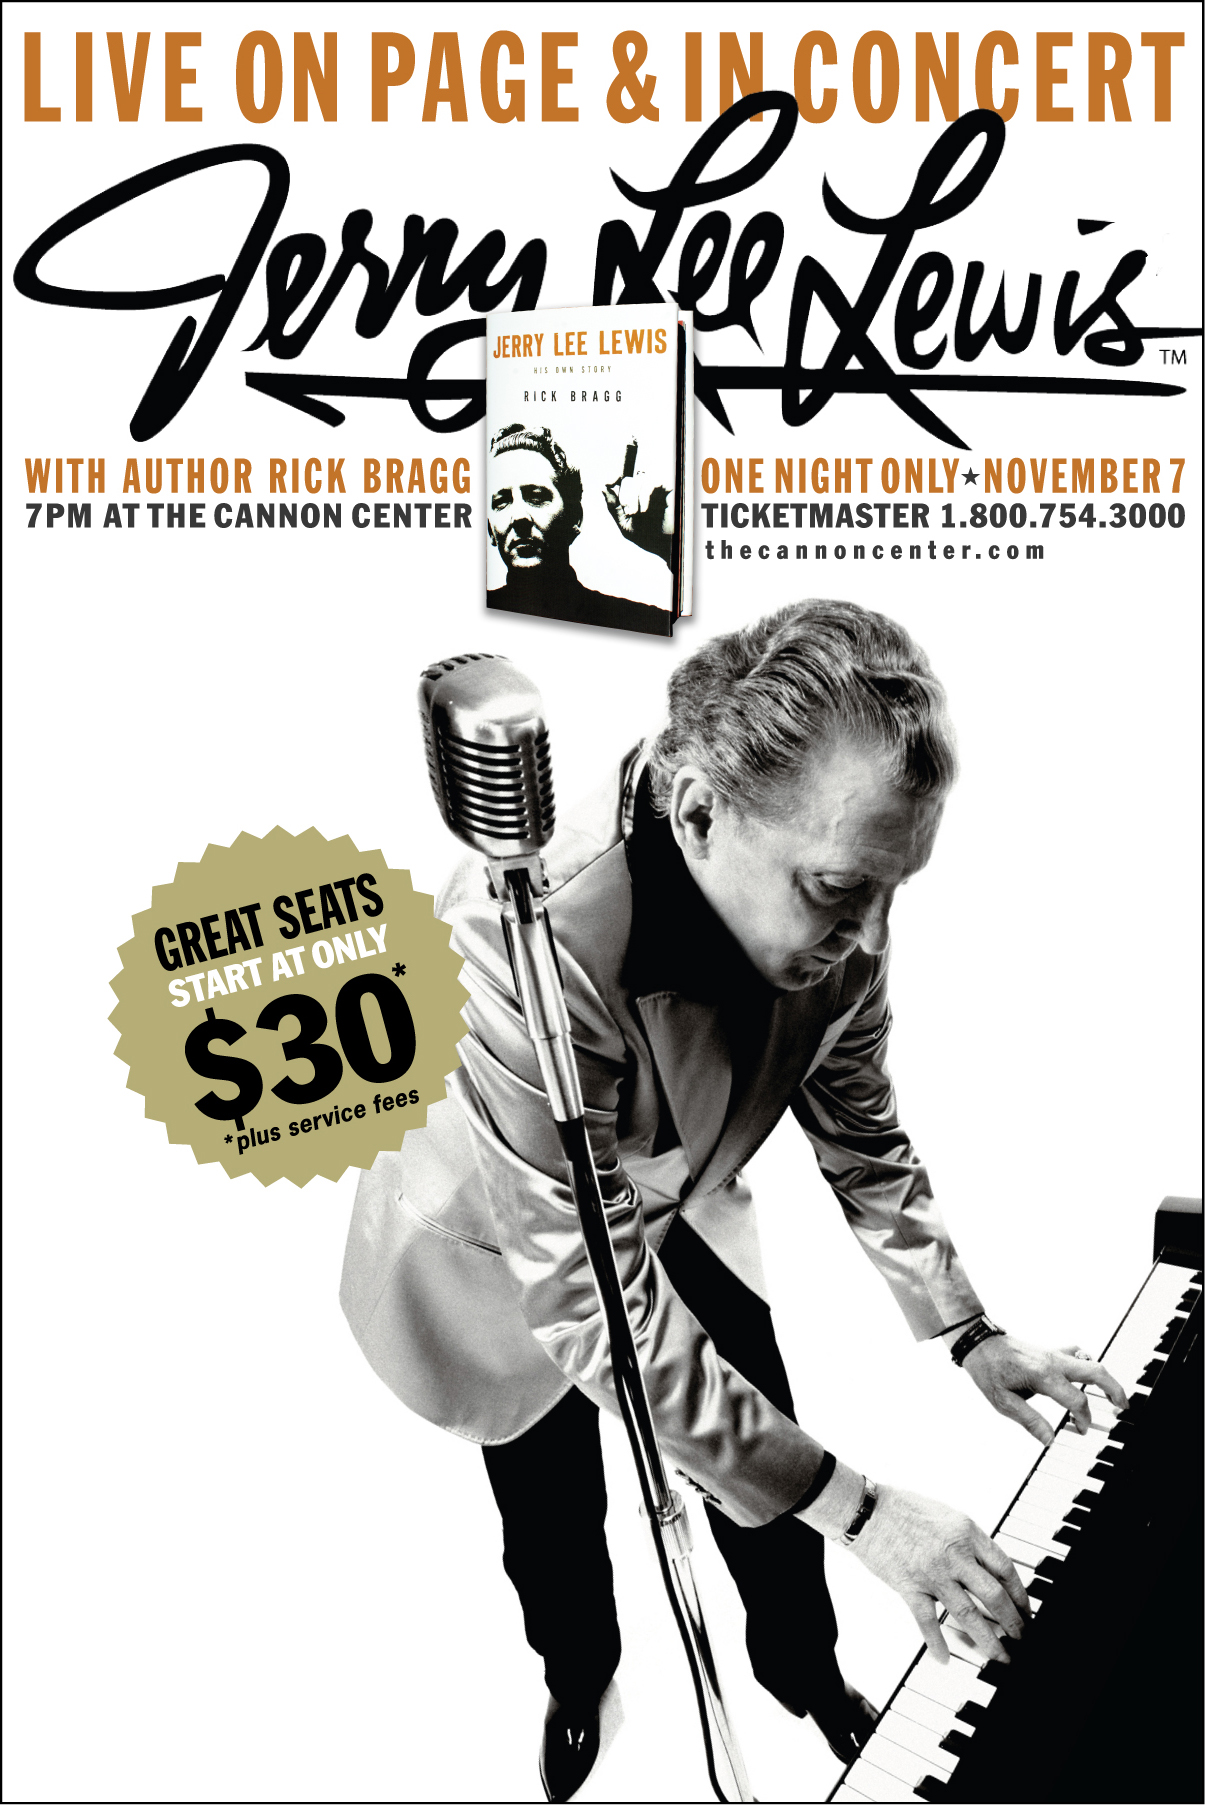  Jerry Lee Lewis and Rick Bragg book reading and concert  Cannon Center Memphis  Direct mail postcard and rack card  Creative, copywriting and design by Chuck Mitchell  Photo courtesy JLL 